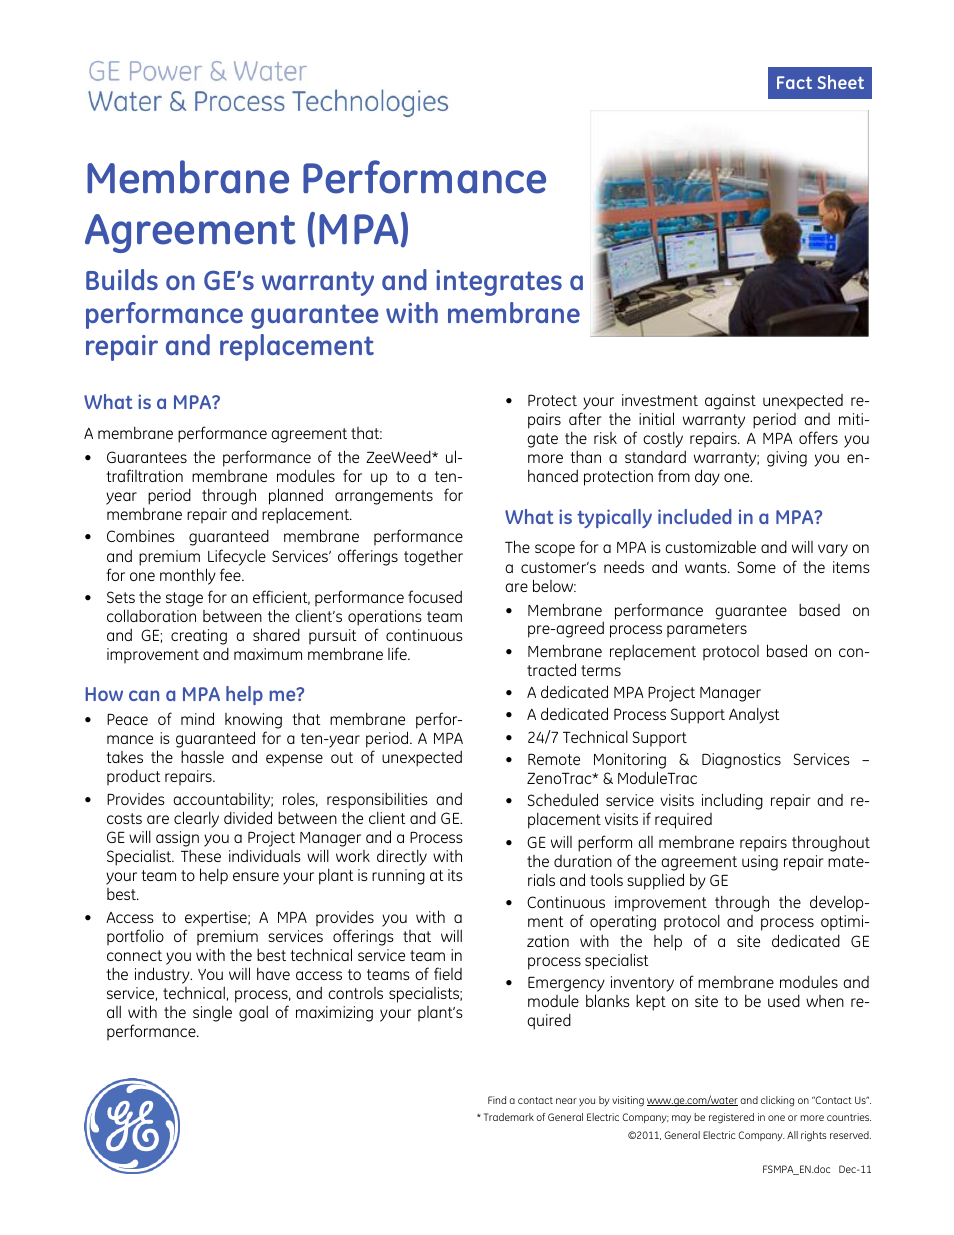 Mobile Water Treatment Systems - Membrane Performance Agreements